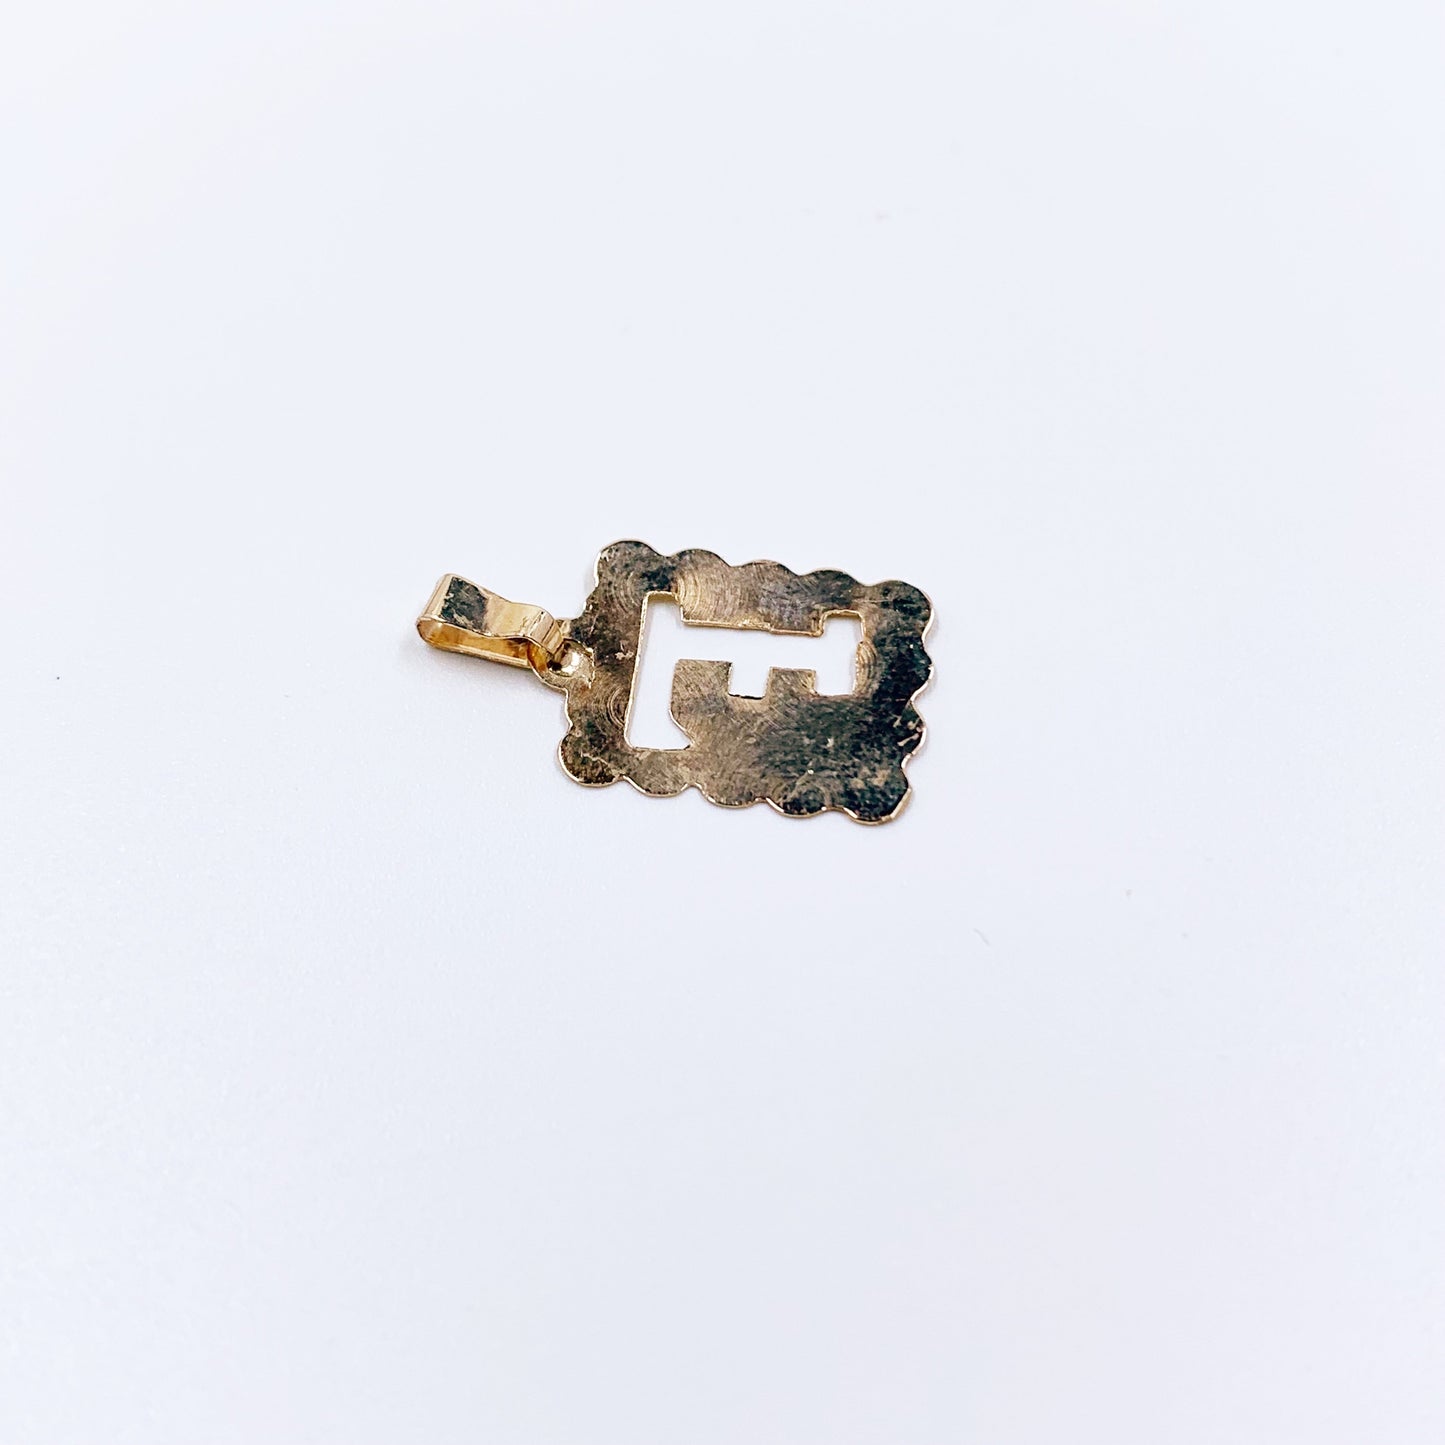 Vintage 10K Letter F Cutout Charm | 10K Yellow Gold Initial F Charm